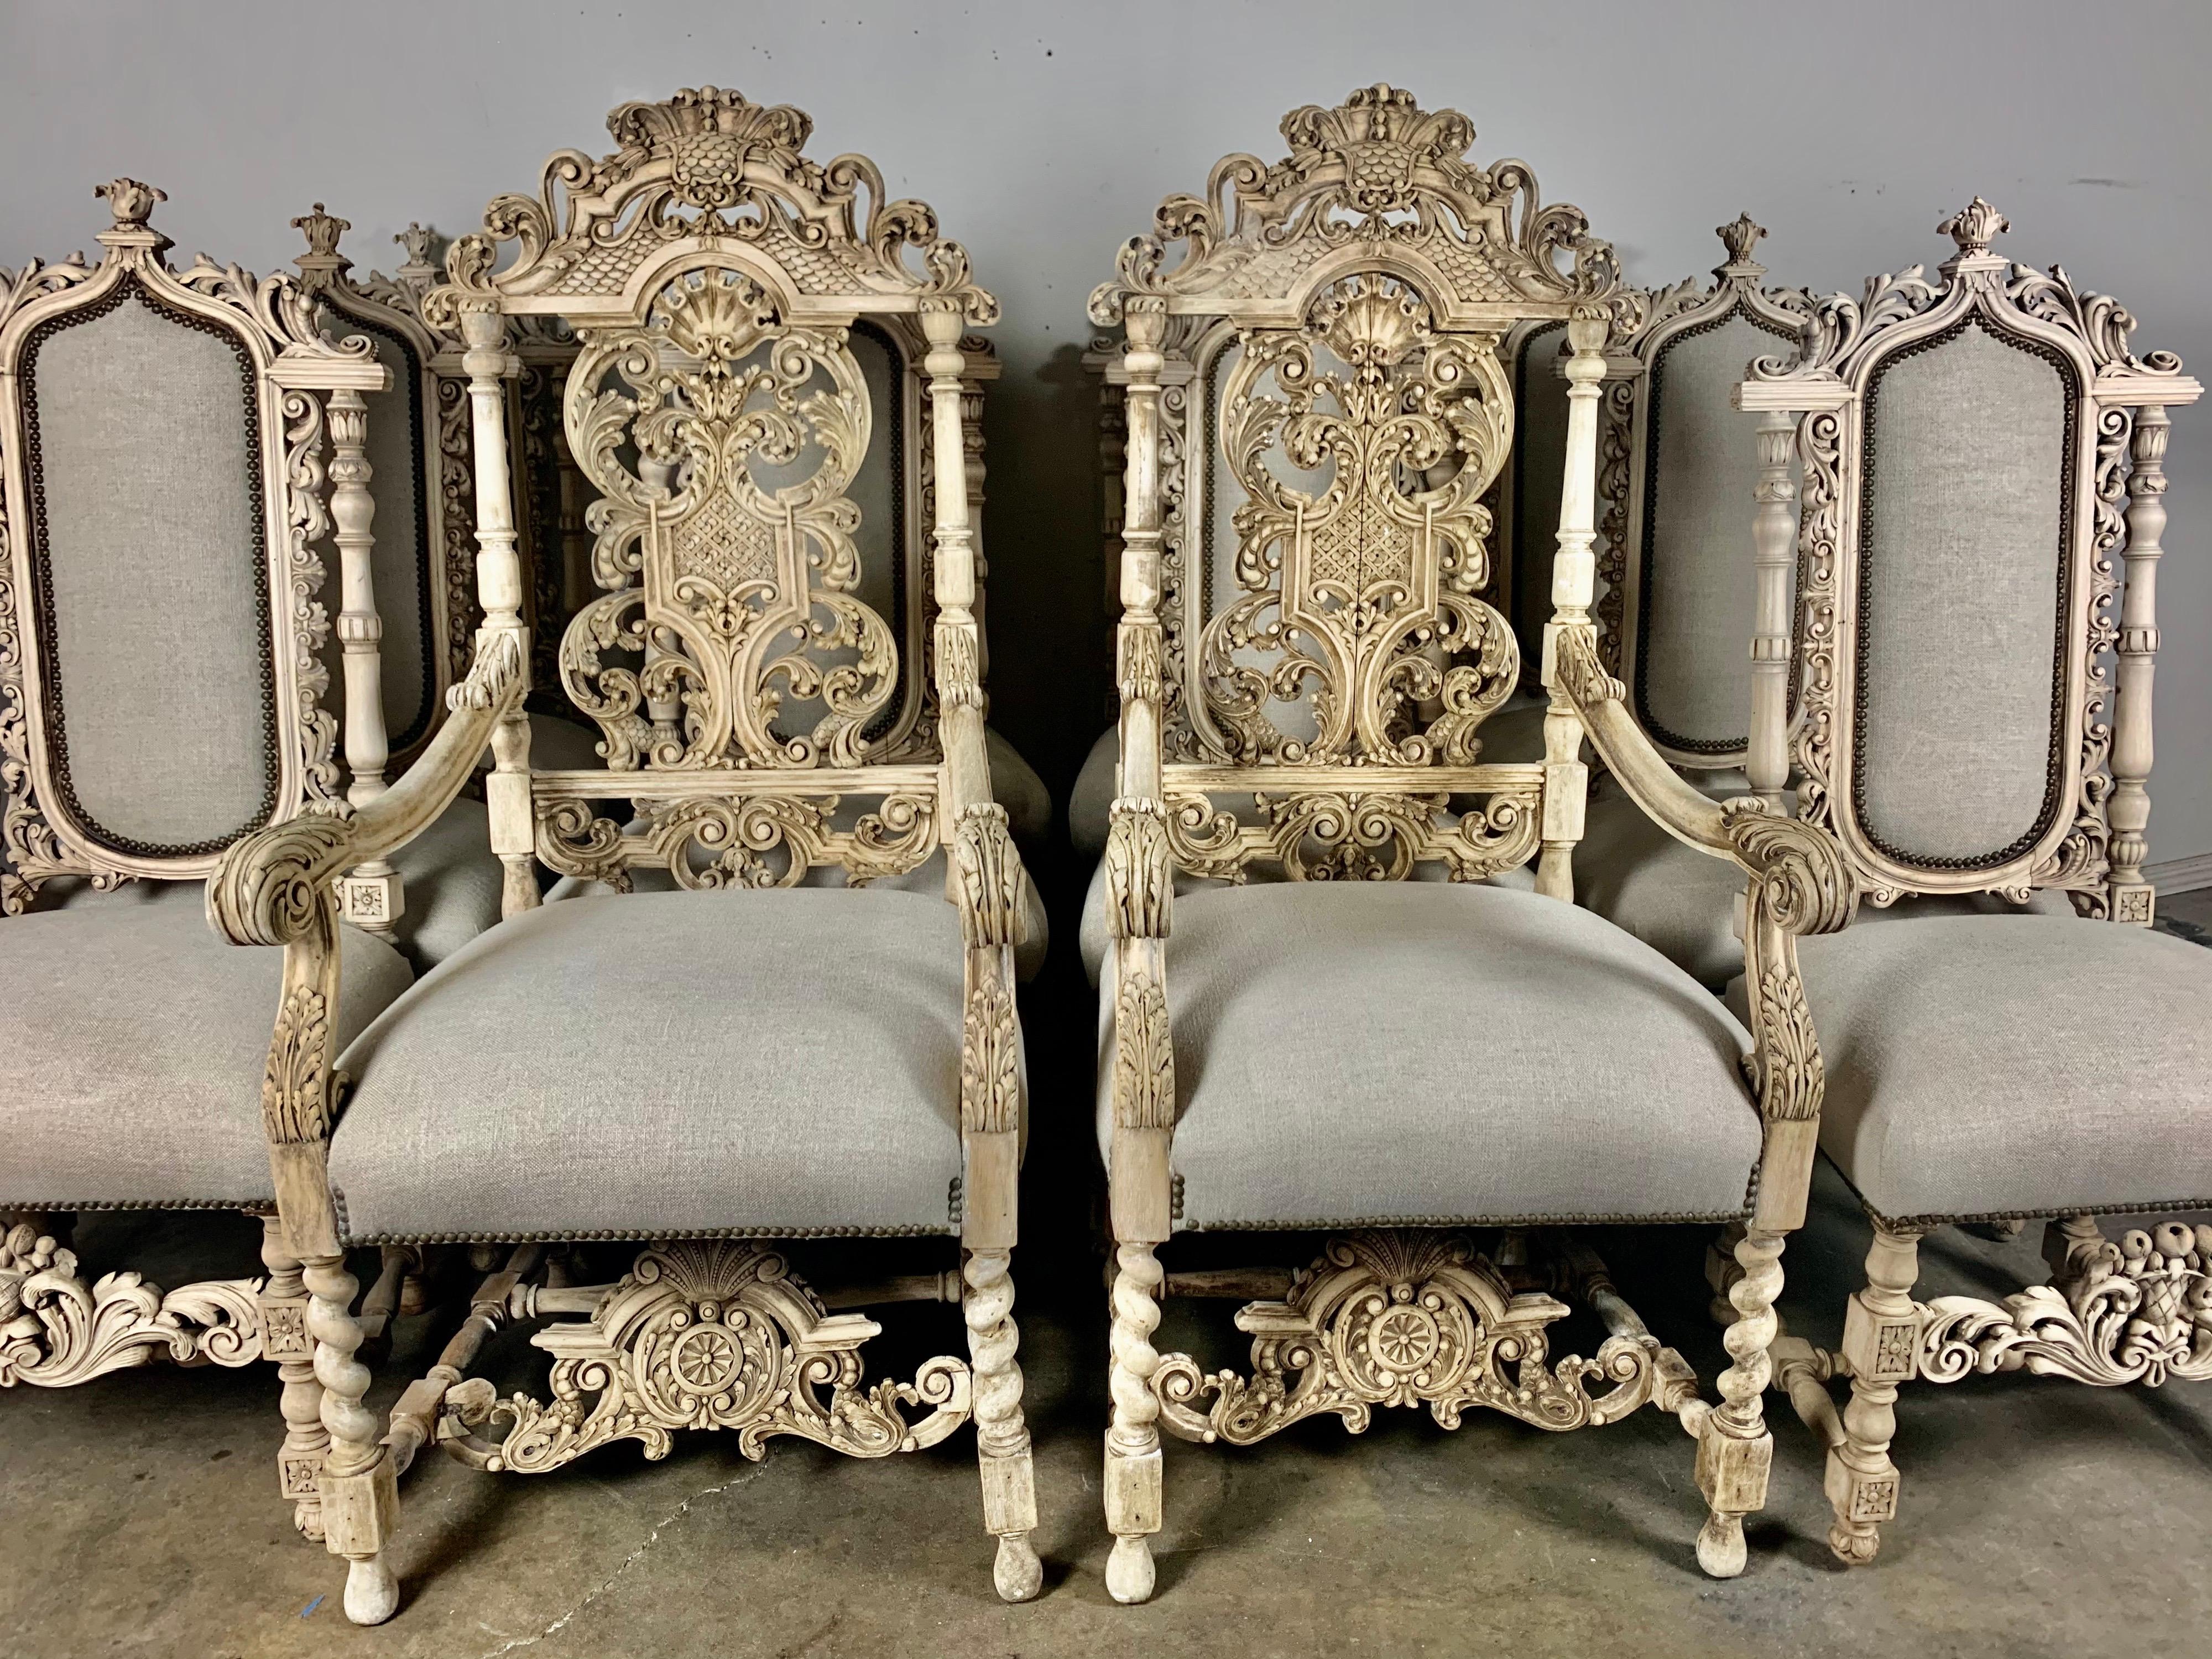 Set of twelve Italian hand carved Rococo style dining chairs that are newly reupholstered in a washed Belgium linen with nailhead trim detail. They are finely carved with intricate details of swirling acanthus leaves and more. Natural walnut